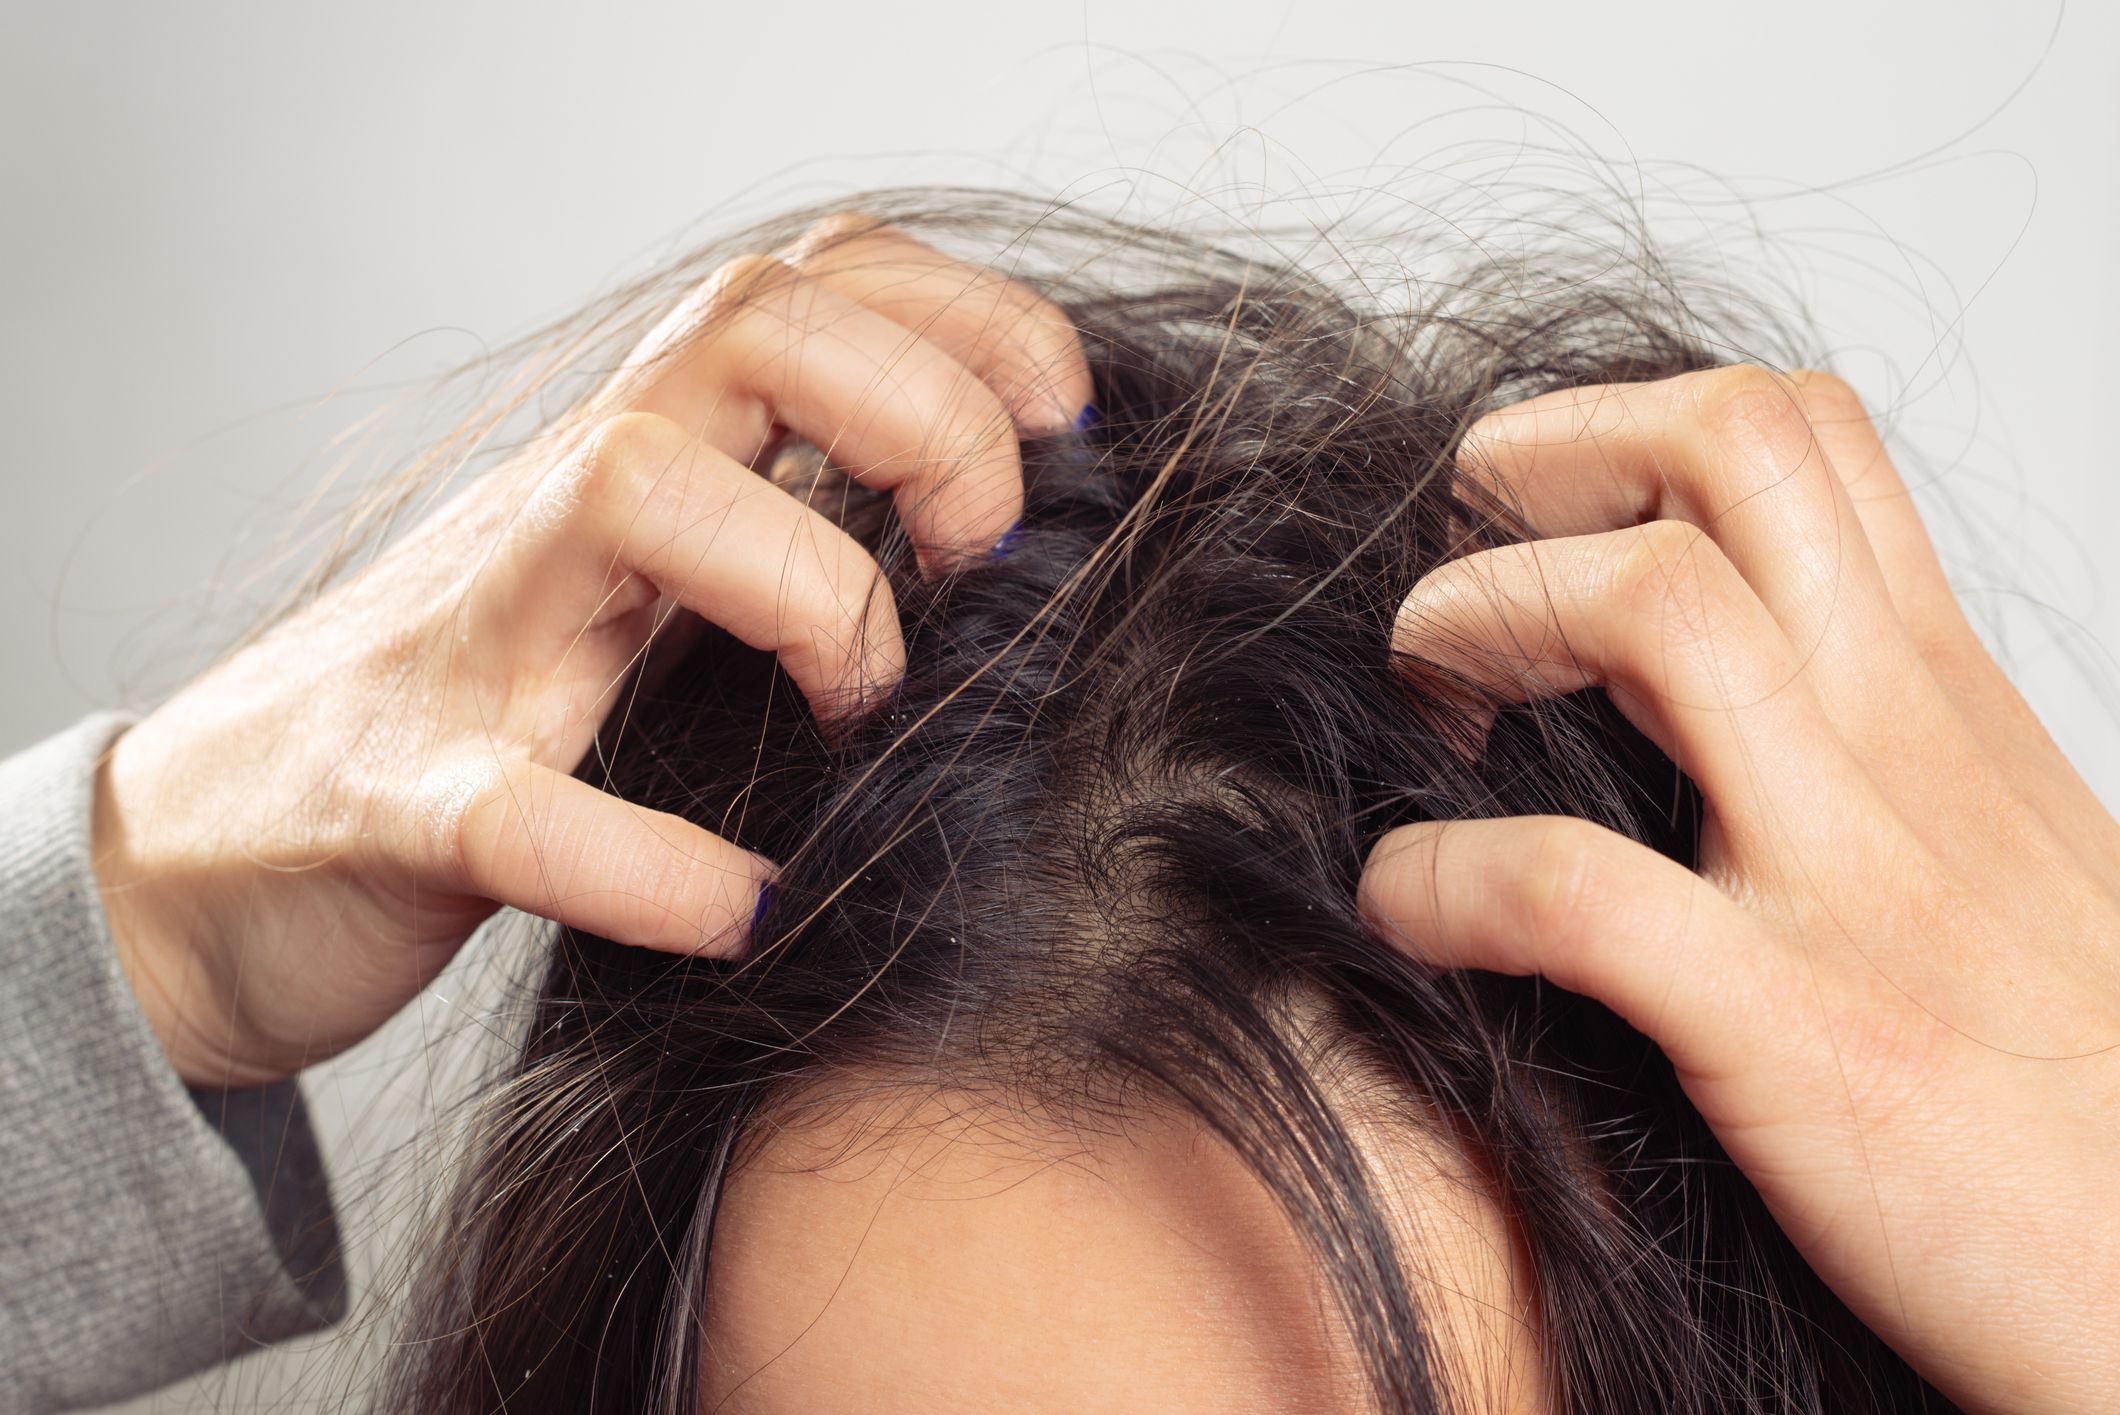 How an Itchy Scalp Is Treated